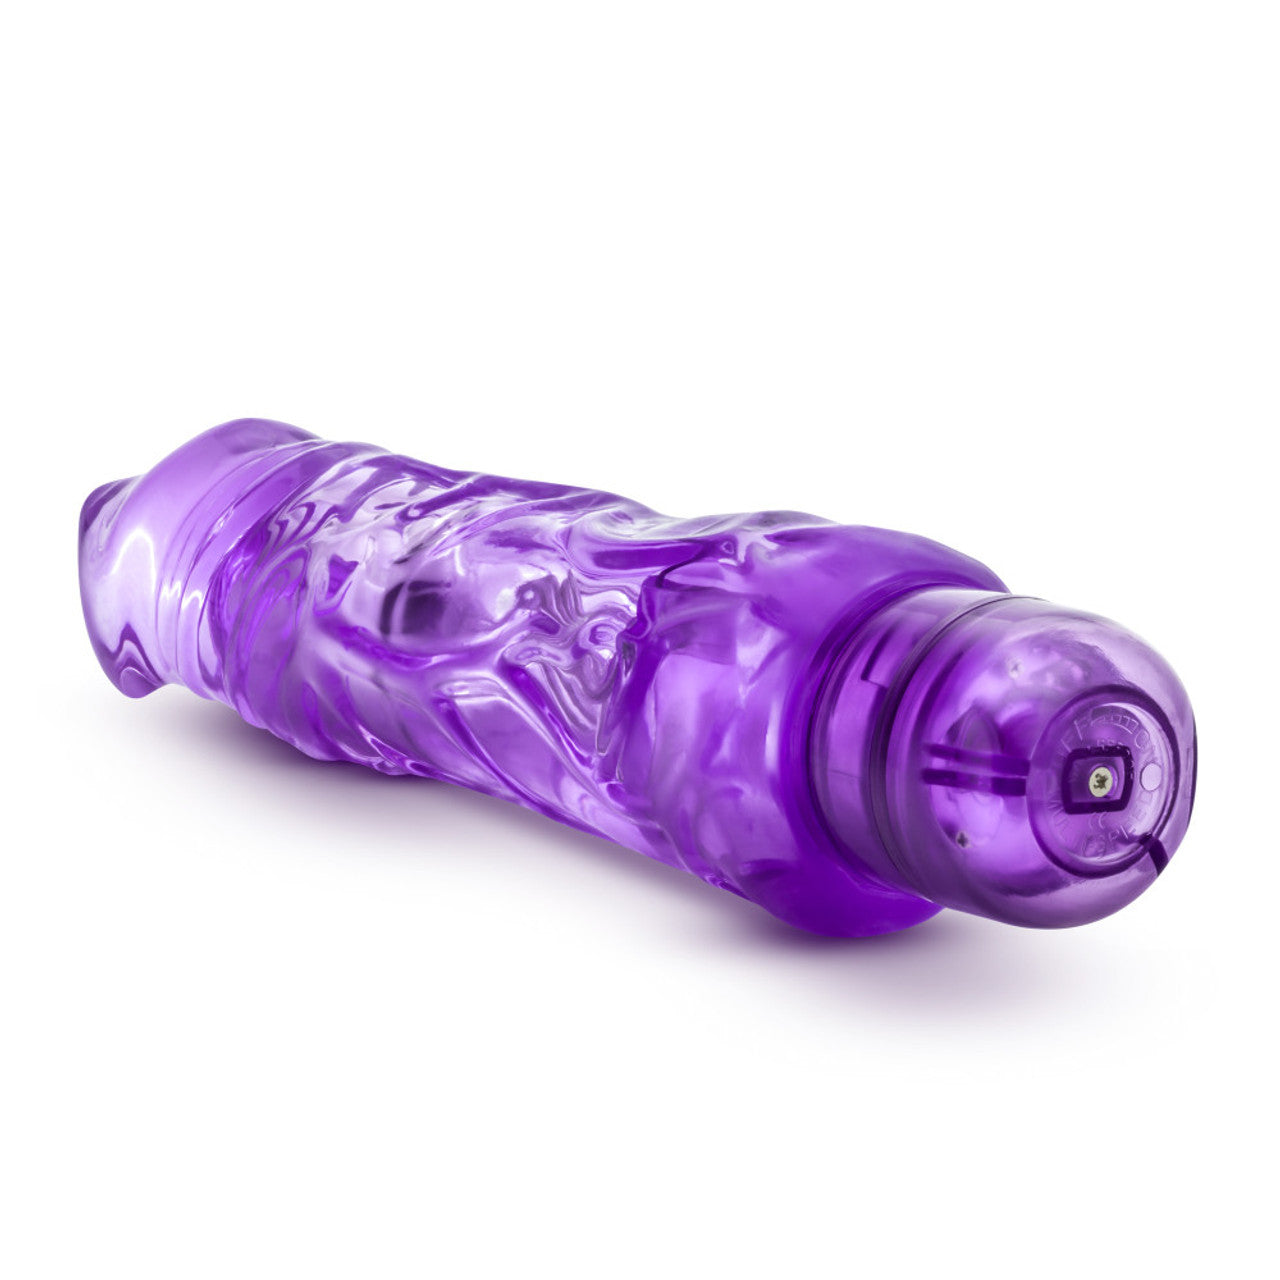 Naturally Yours Wild Ride Vibrating Dildo - Purple - Thorn & Feather Sex Toy Canada